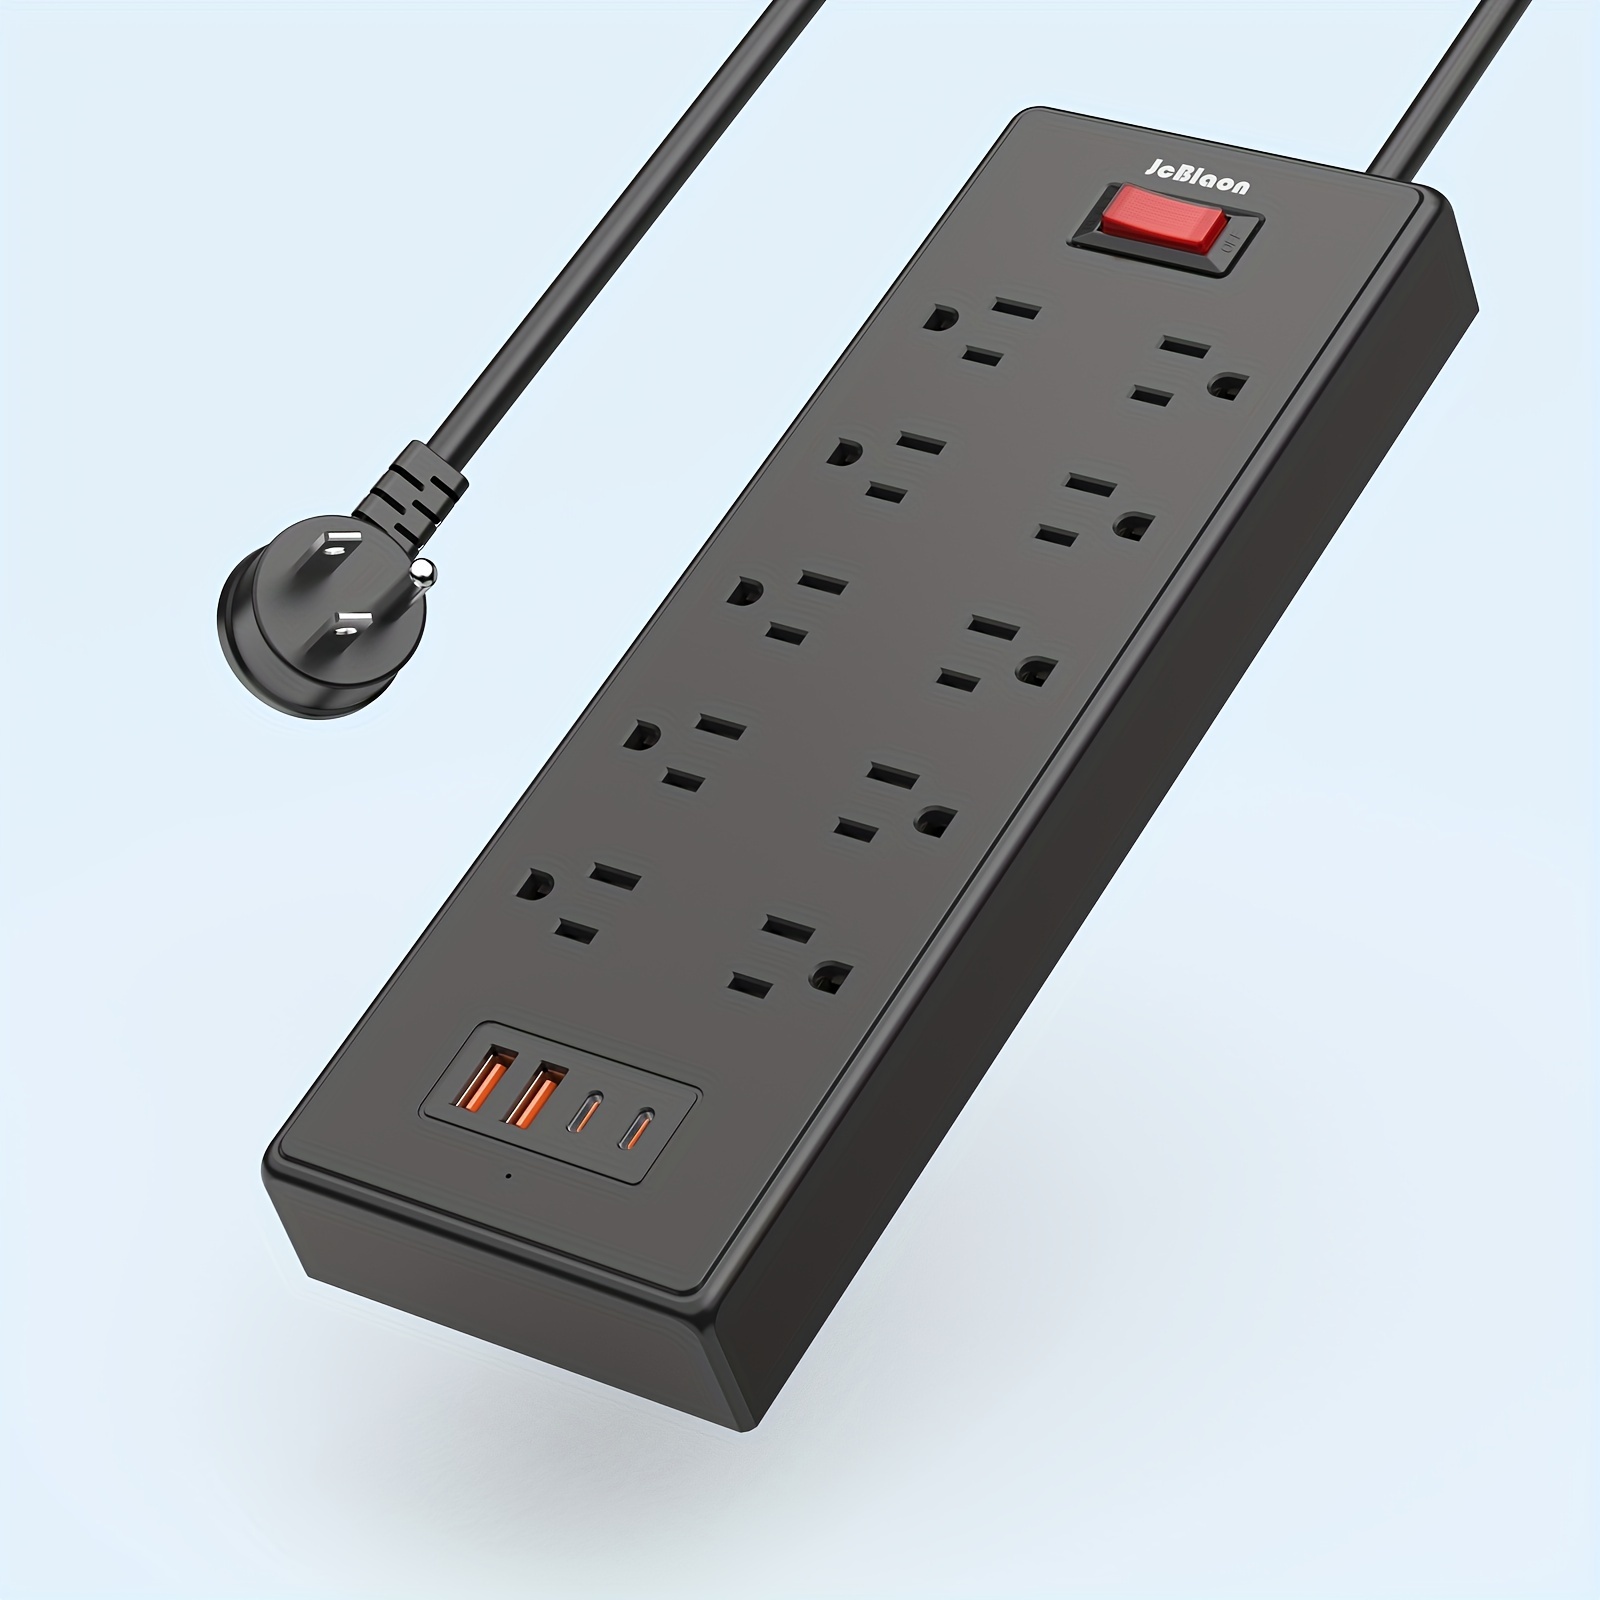 

Power Strip Protector With Usb C Ports, 5ft Flat Plug Extension Cord With Multiple Outlets, 10 Ac Outlets And 4 Usb Ports, Heavy Duty (1625w/13a), Wall Mount, Under Desk For Home, Office, Dorm